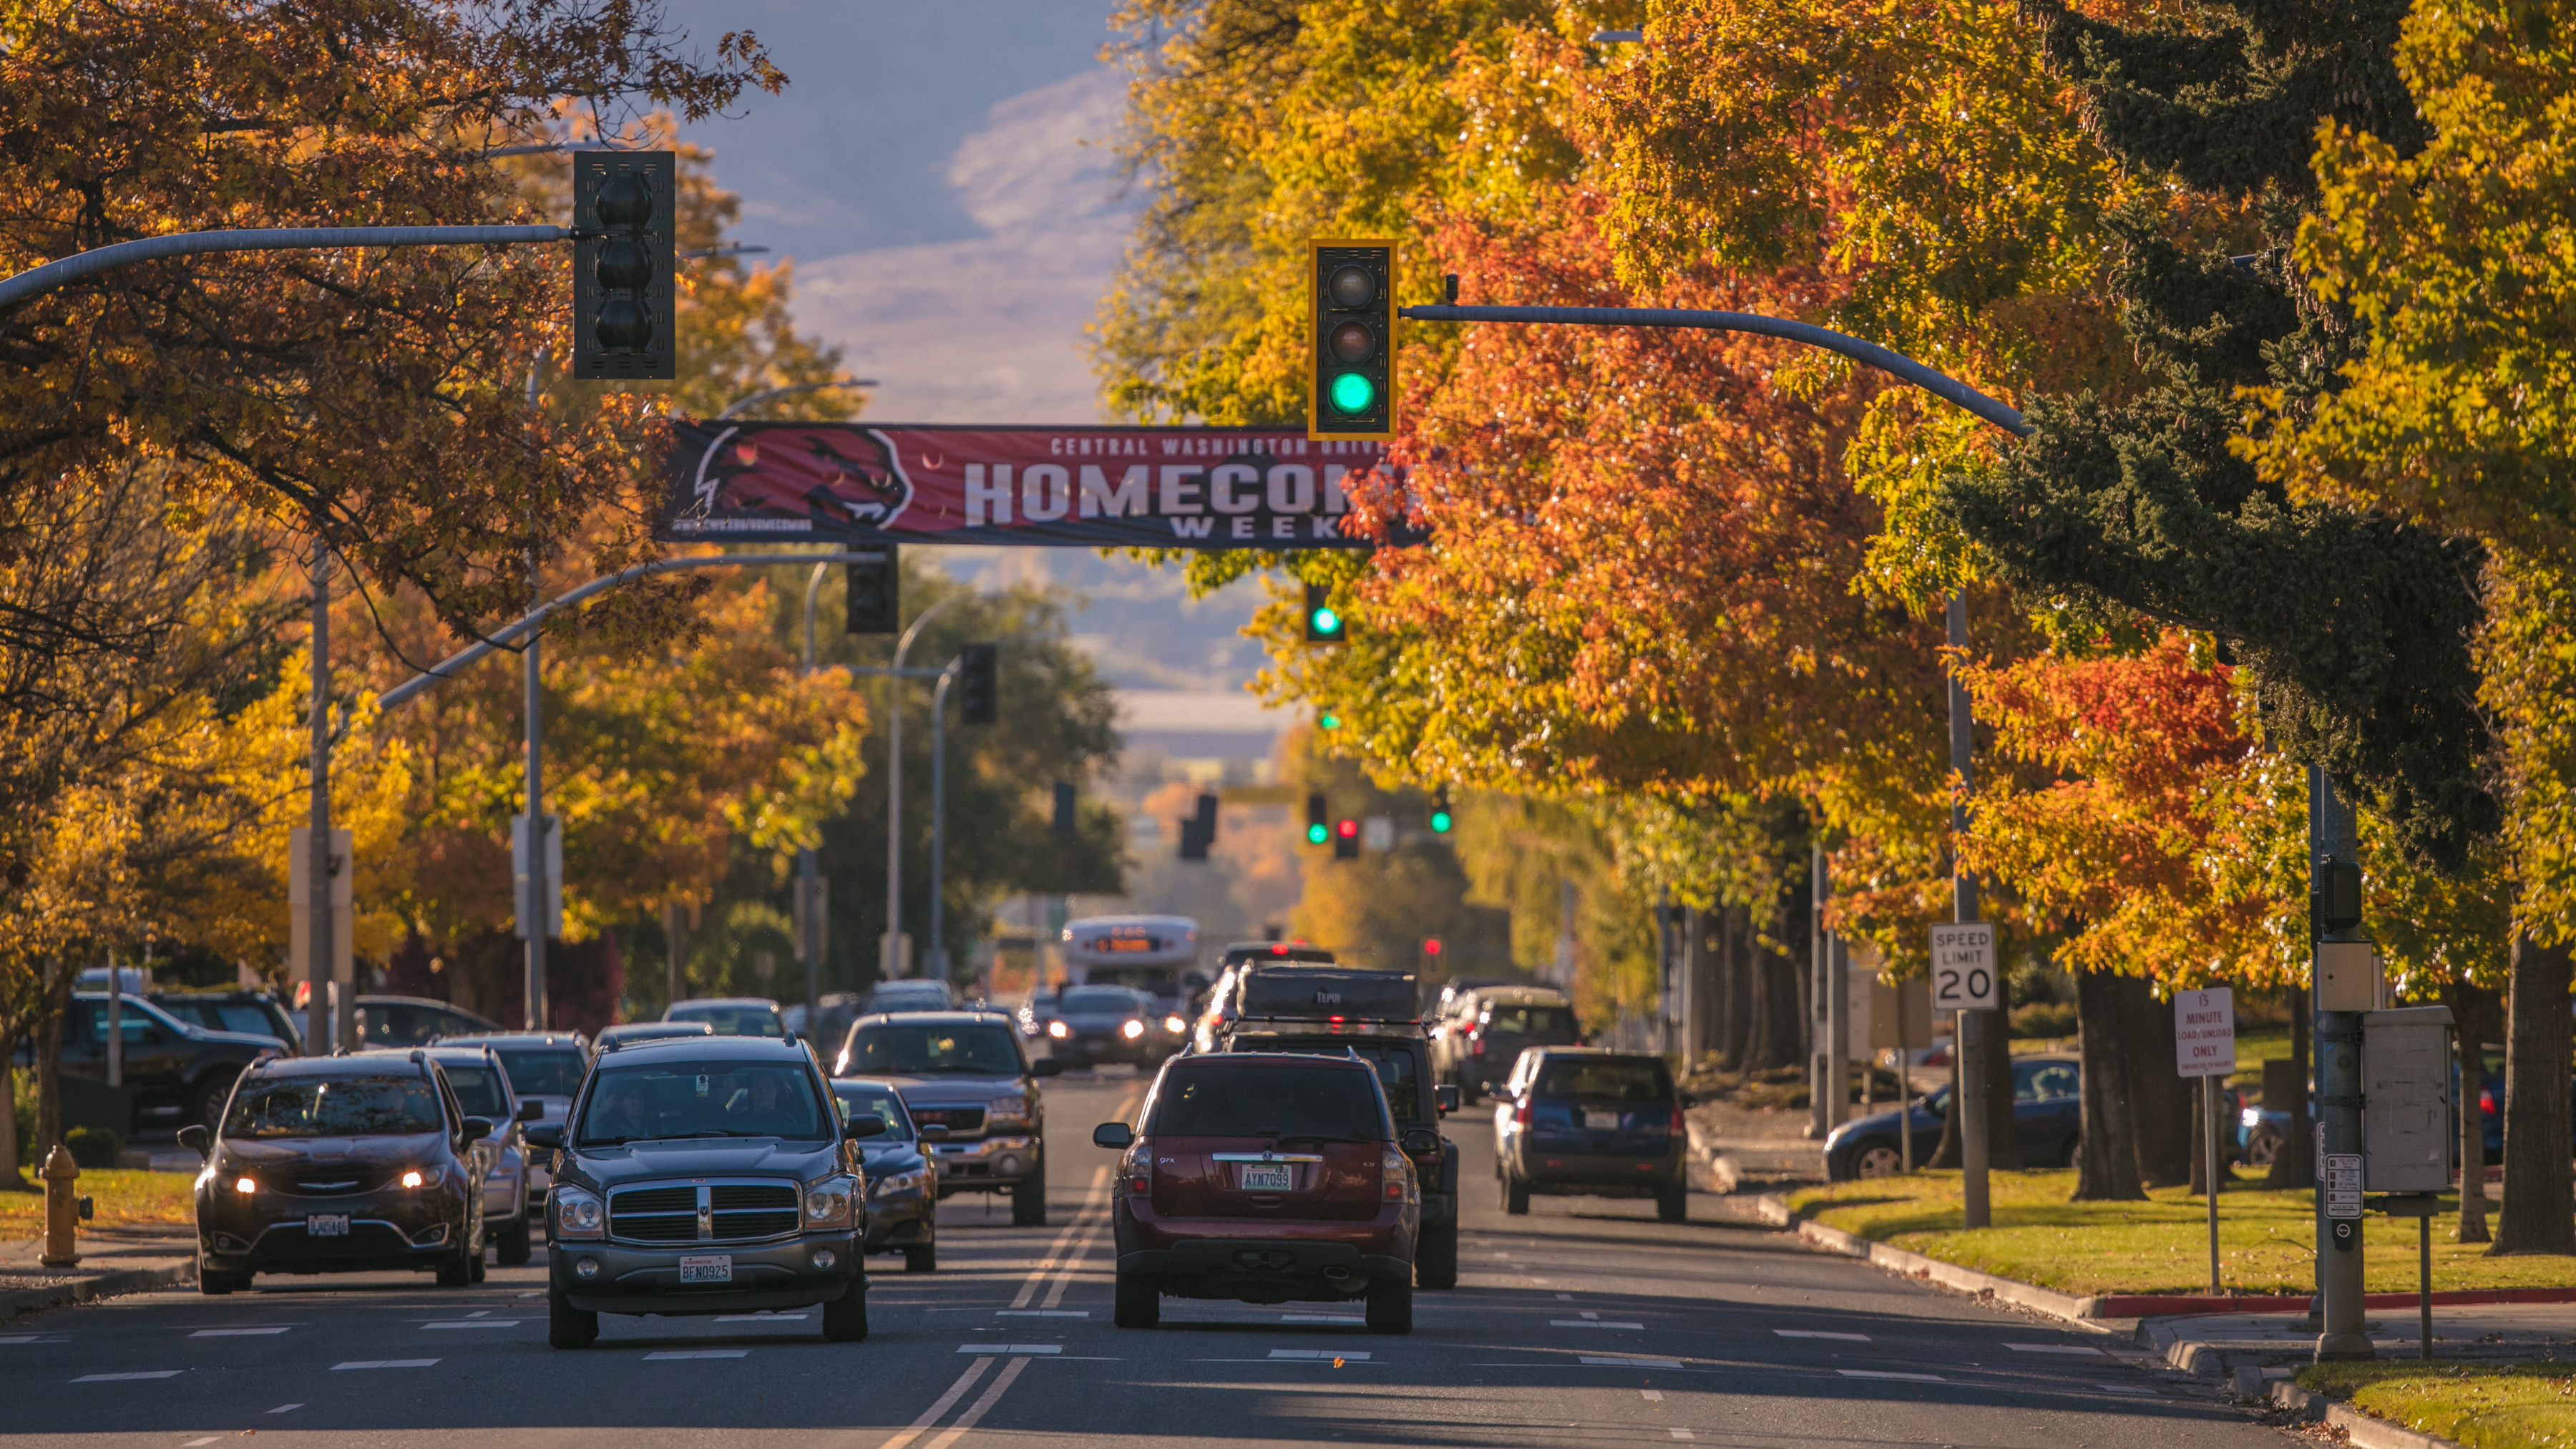 An image of a street in Ellensburg. There is a banner over traffic that says "Central Washington University Homecoming Weekend" and the trees around the road are fall colors, orange and green.